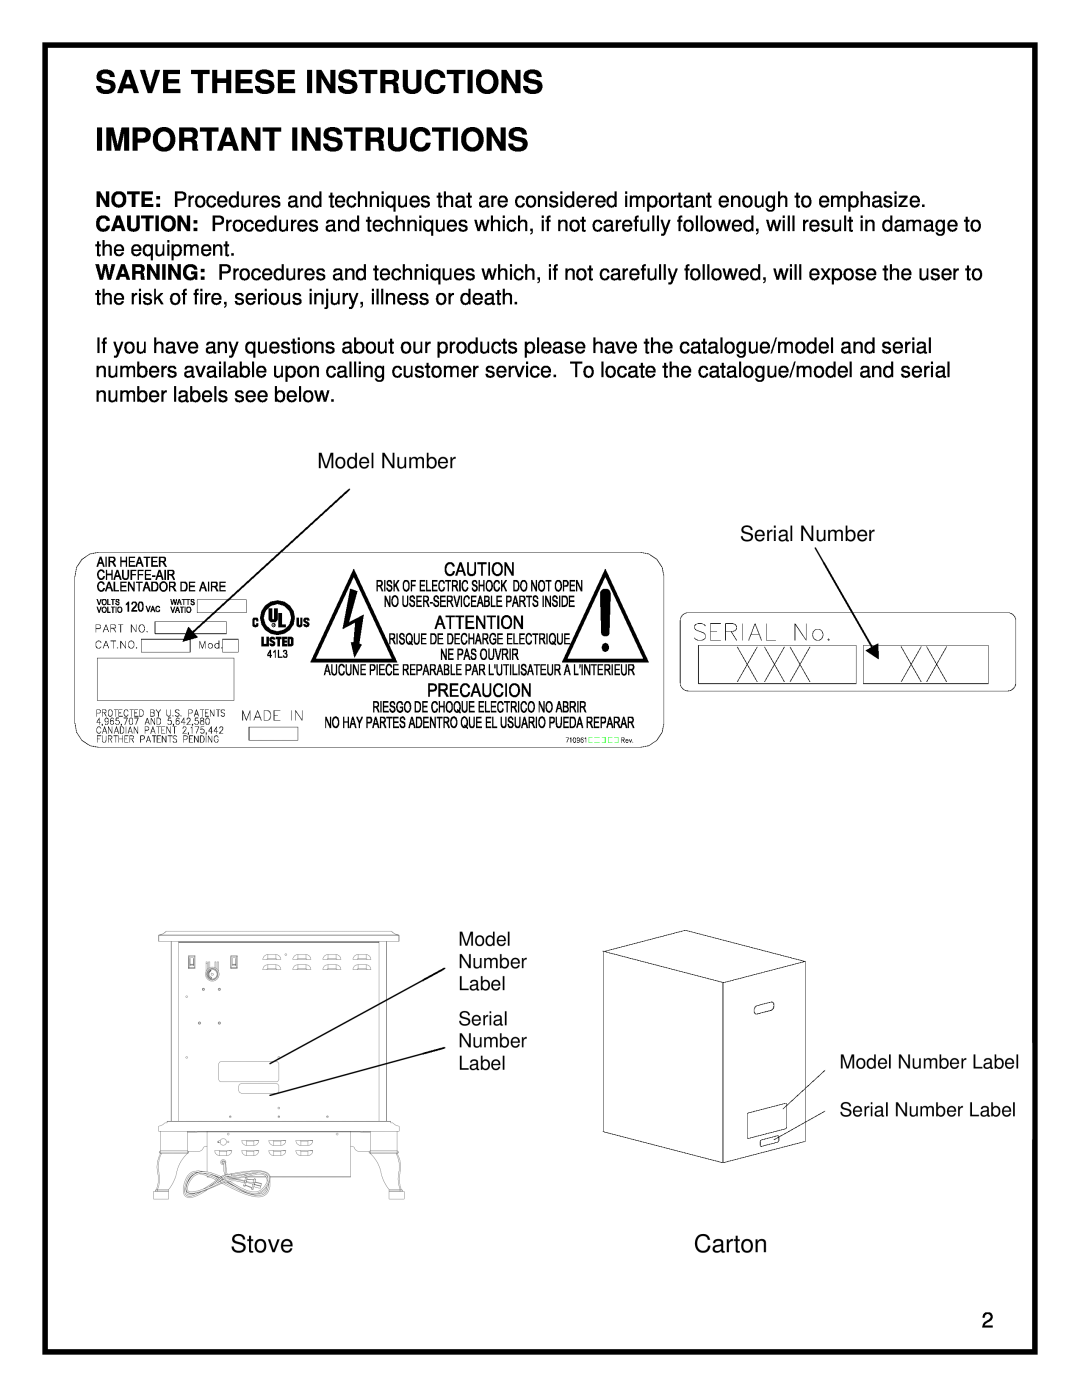 Dimplex DS5629 manual Save These Instructions Important Instructions, Stove, Carton 